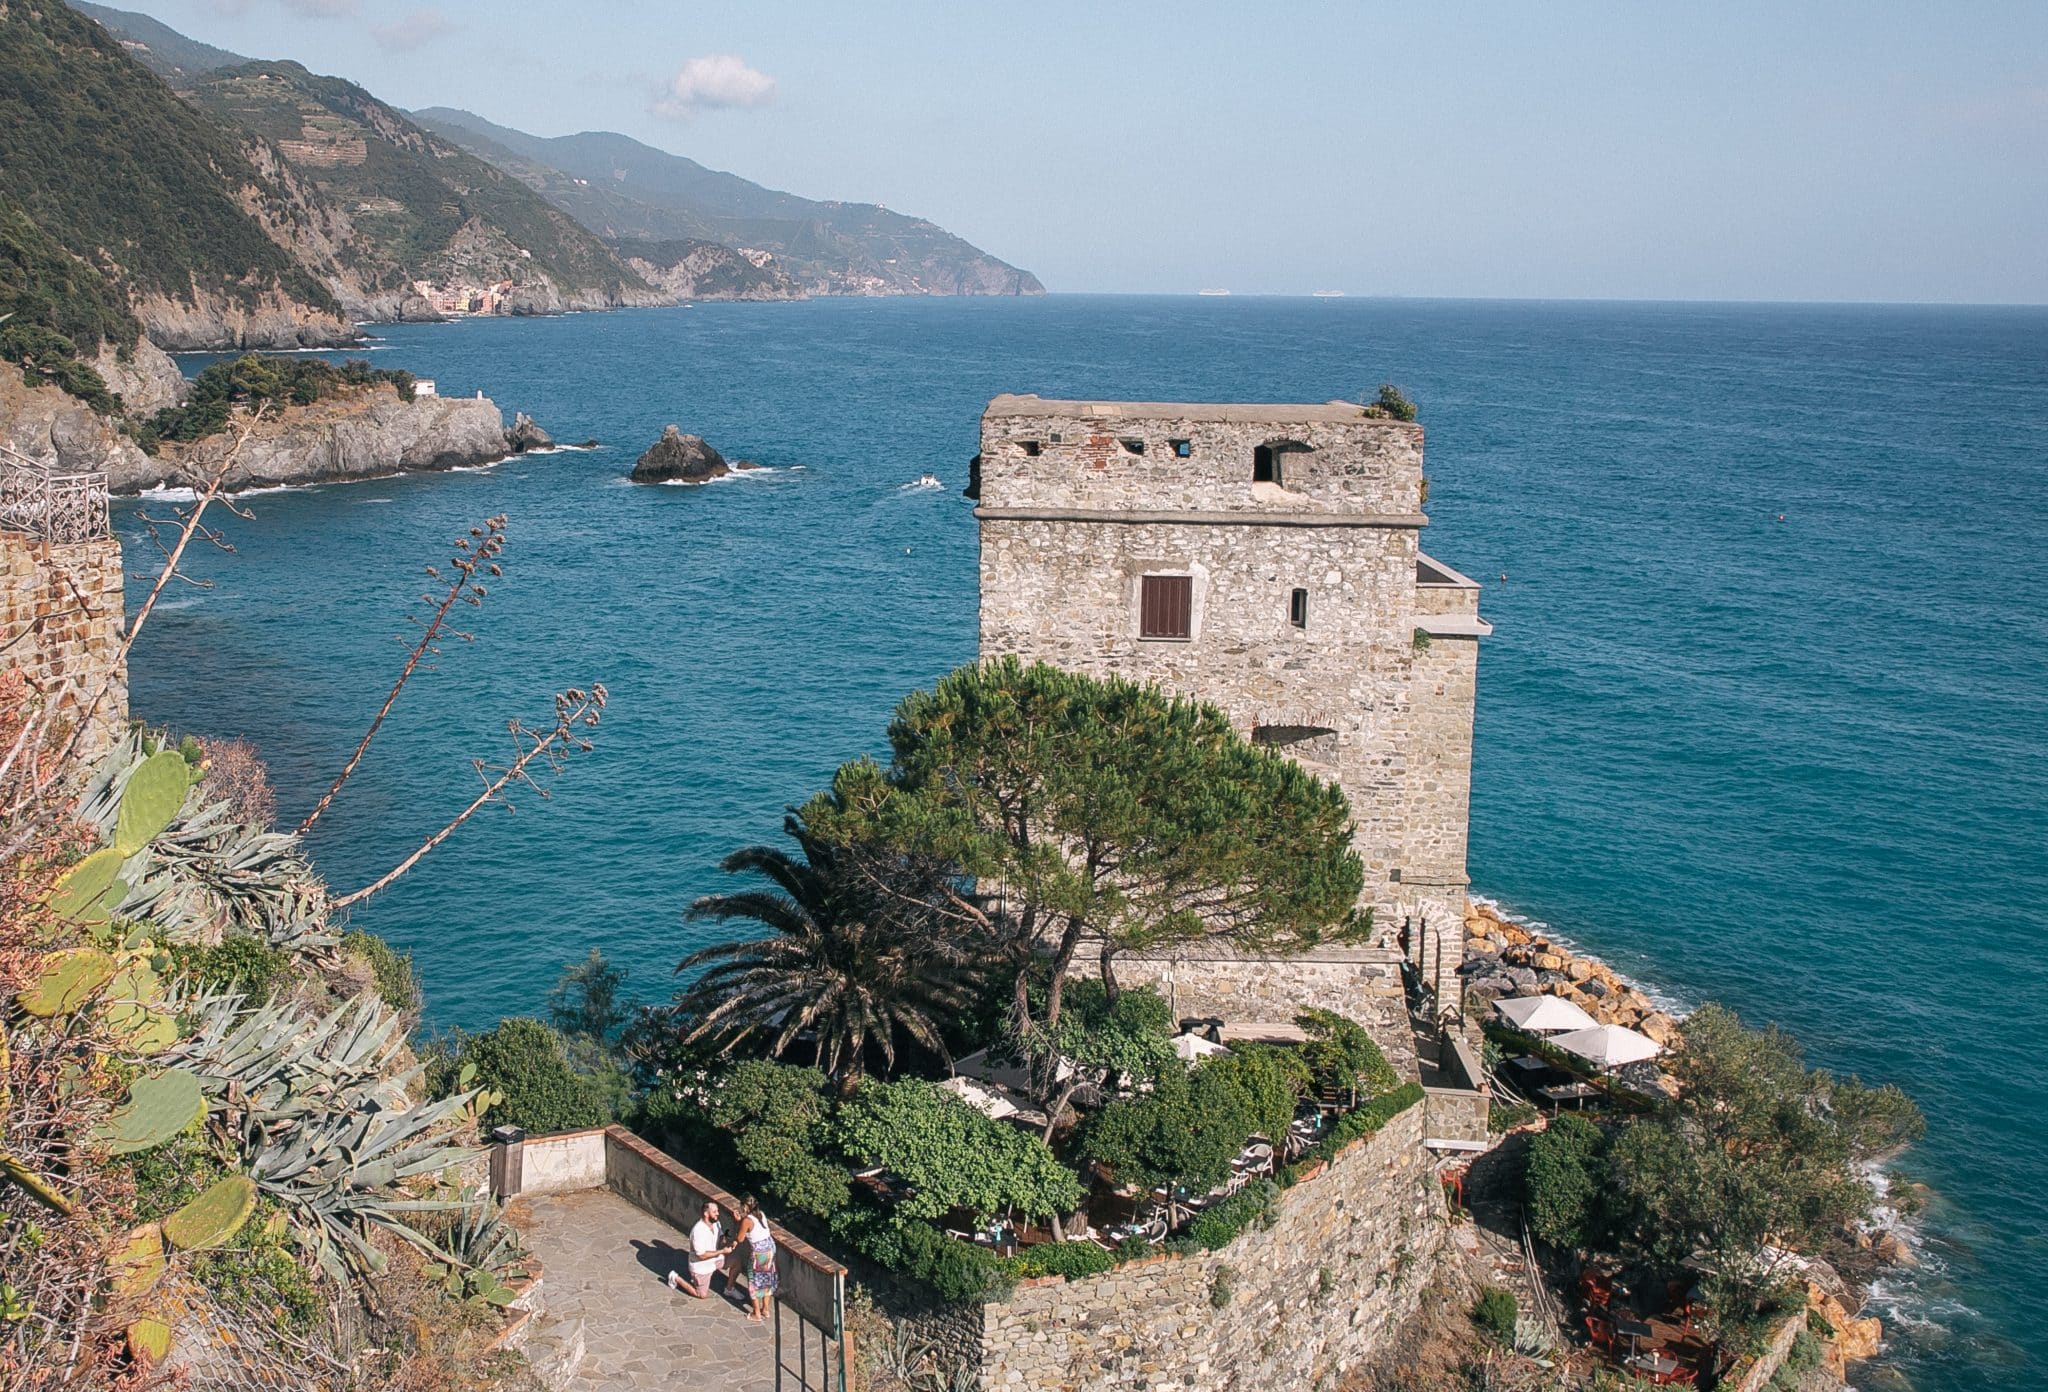 Surprise proposal in Italy overlooking castle and water view